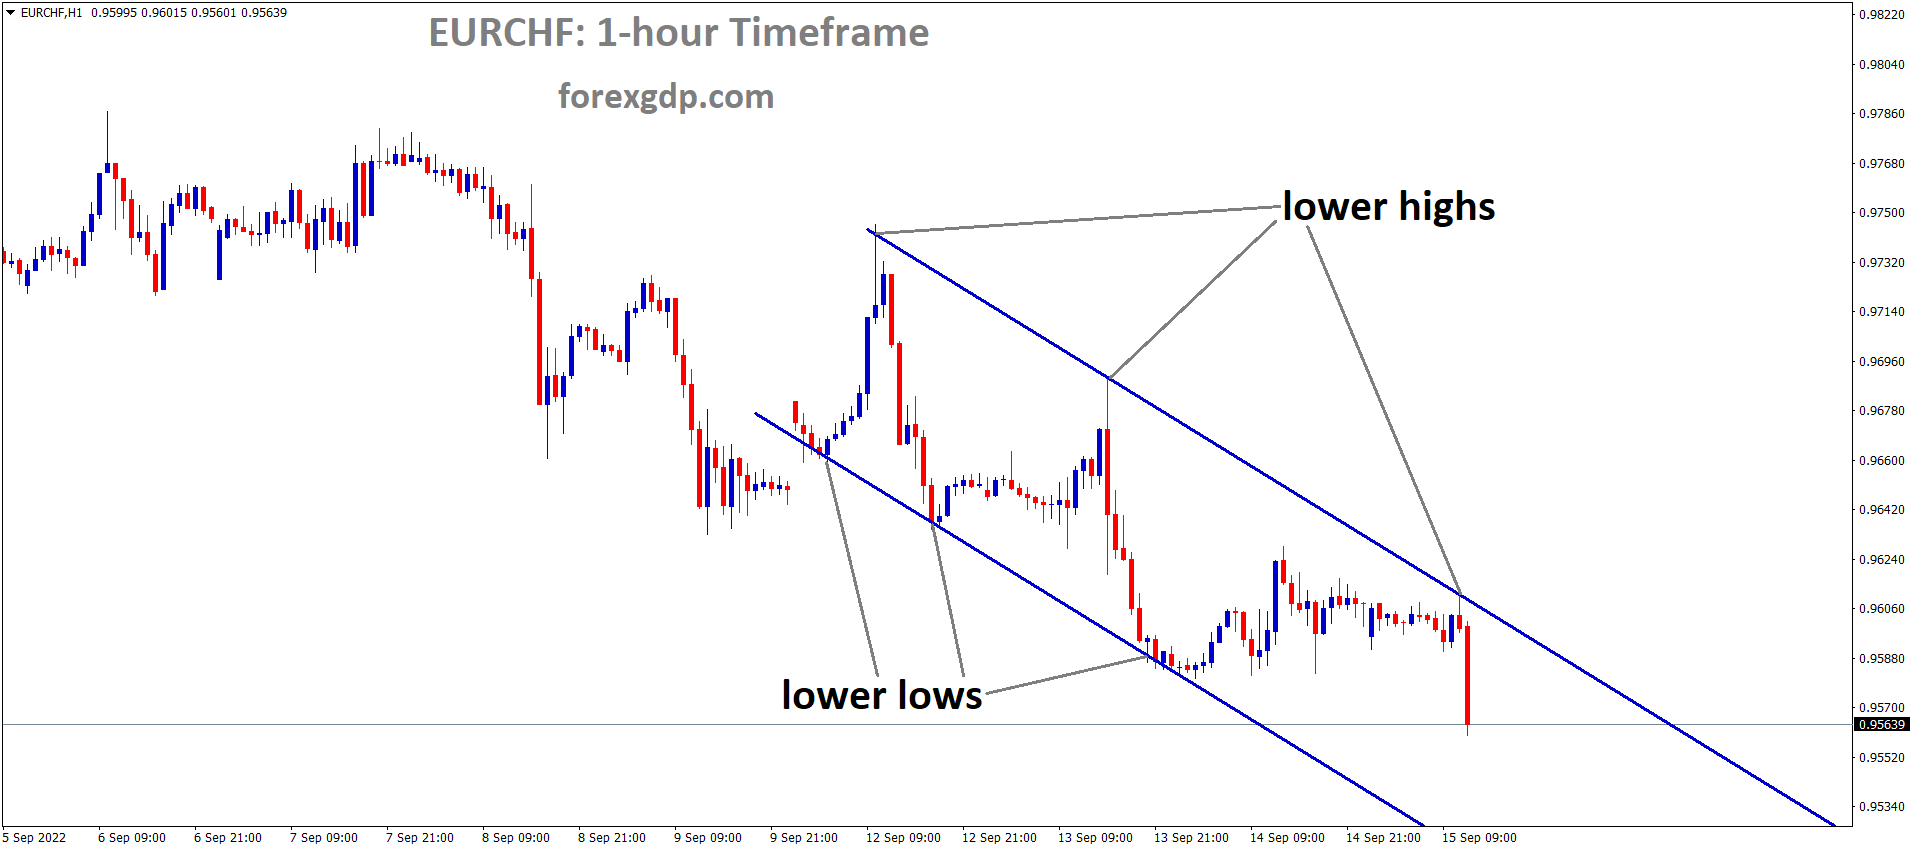 EURCHF is moving in the Descending channel and the market has fallen from the lower high area of the channel